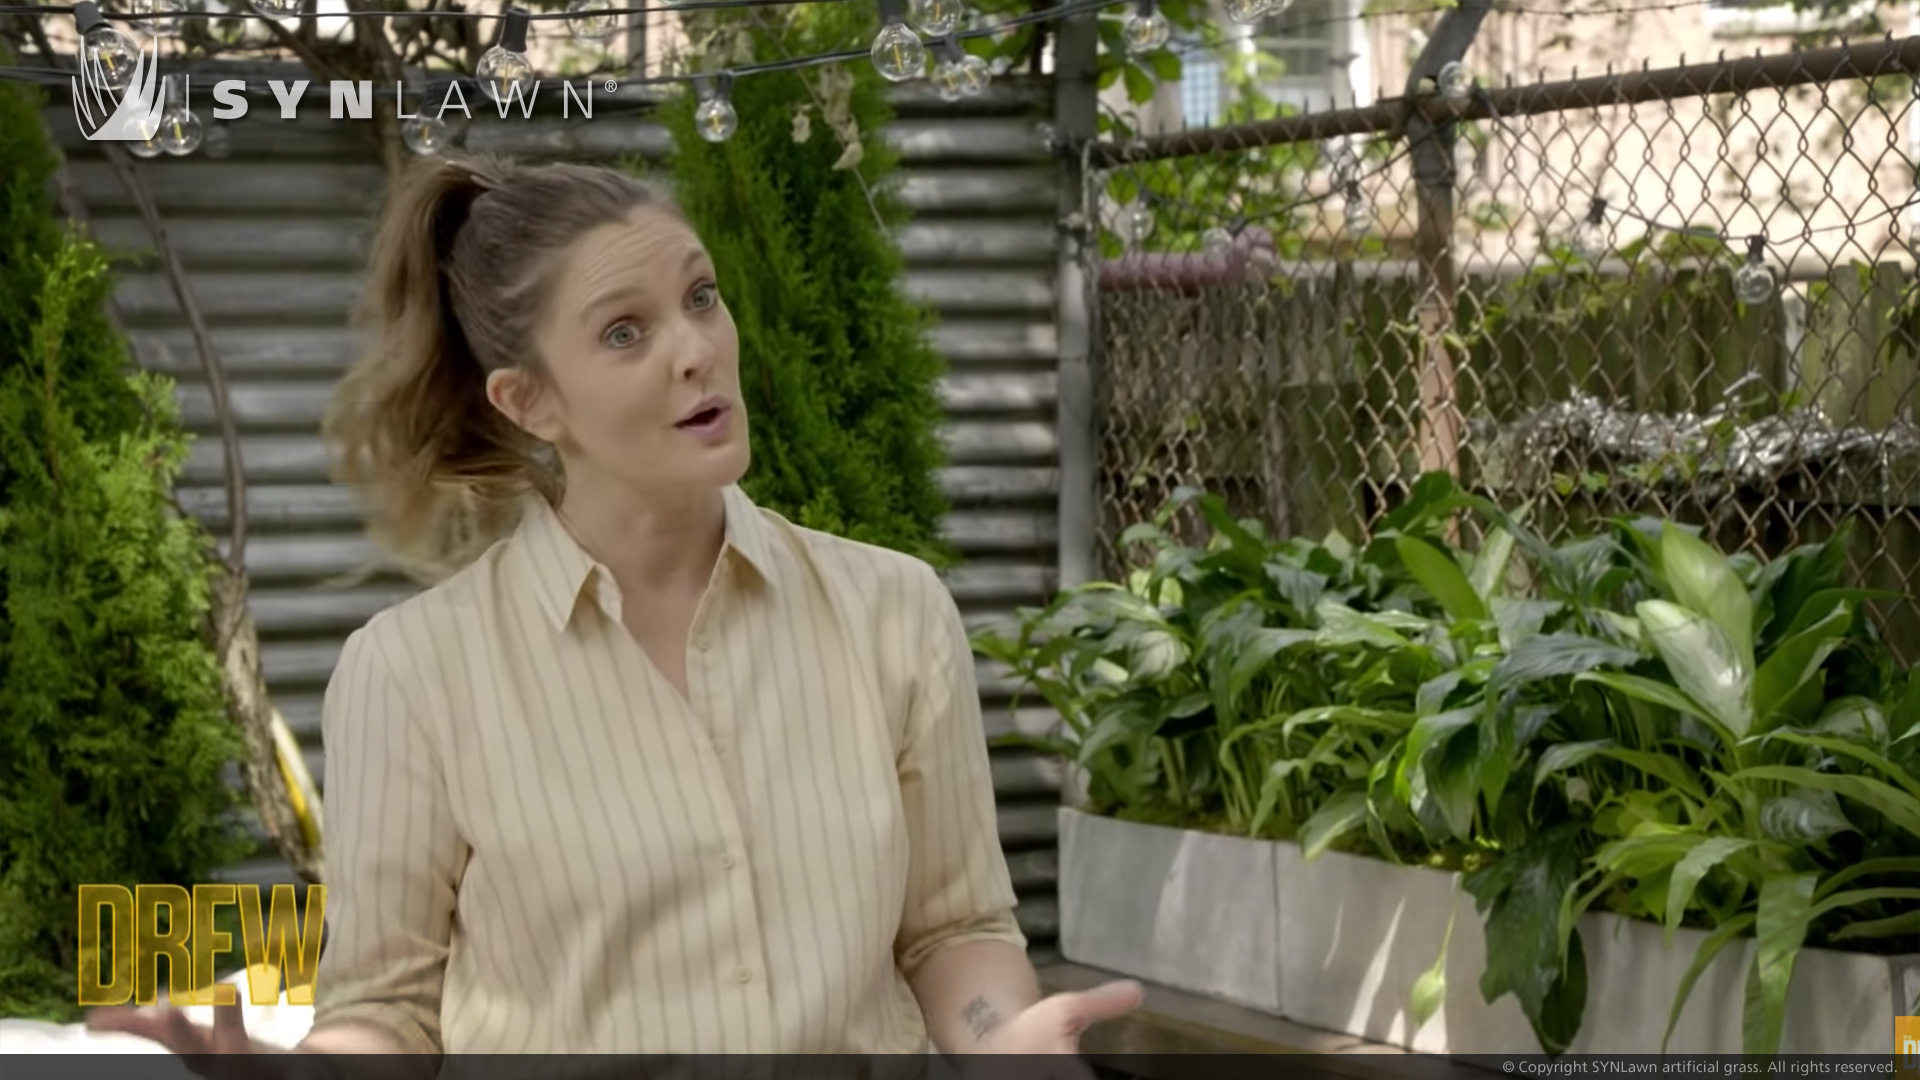 SYNLawn NY Donates Backyard Makeover on The Drew Barrymore Show